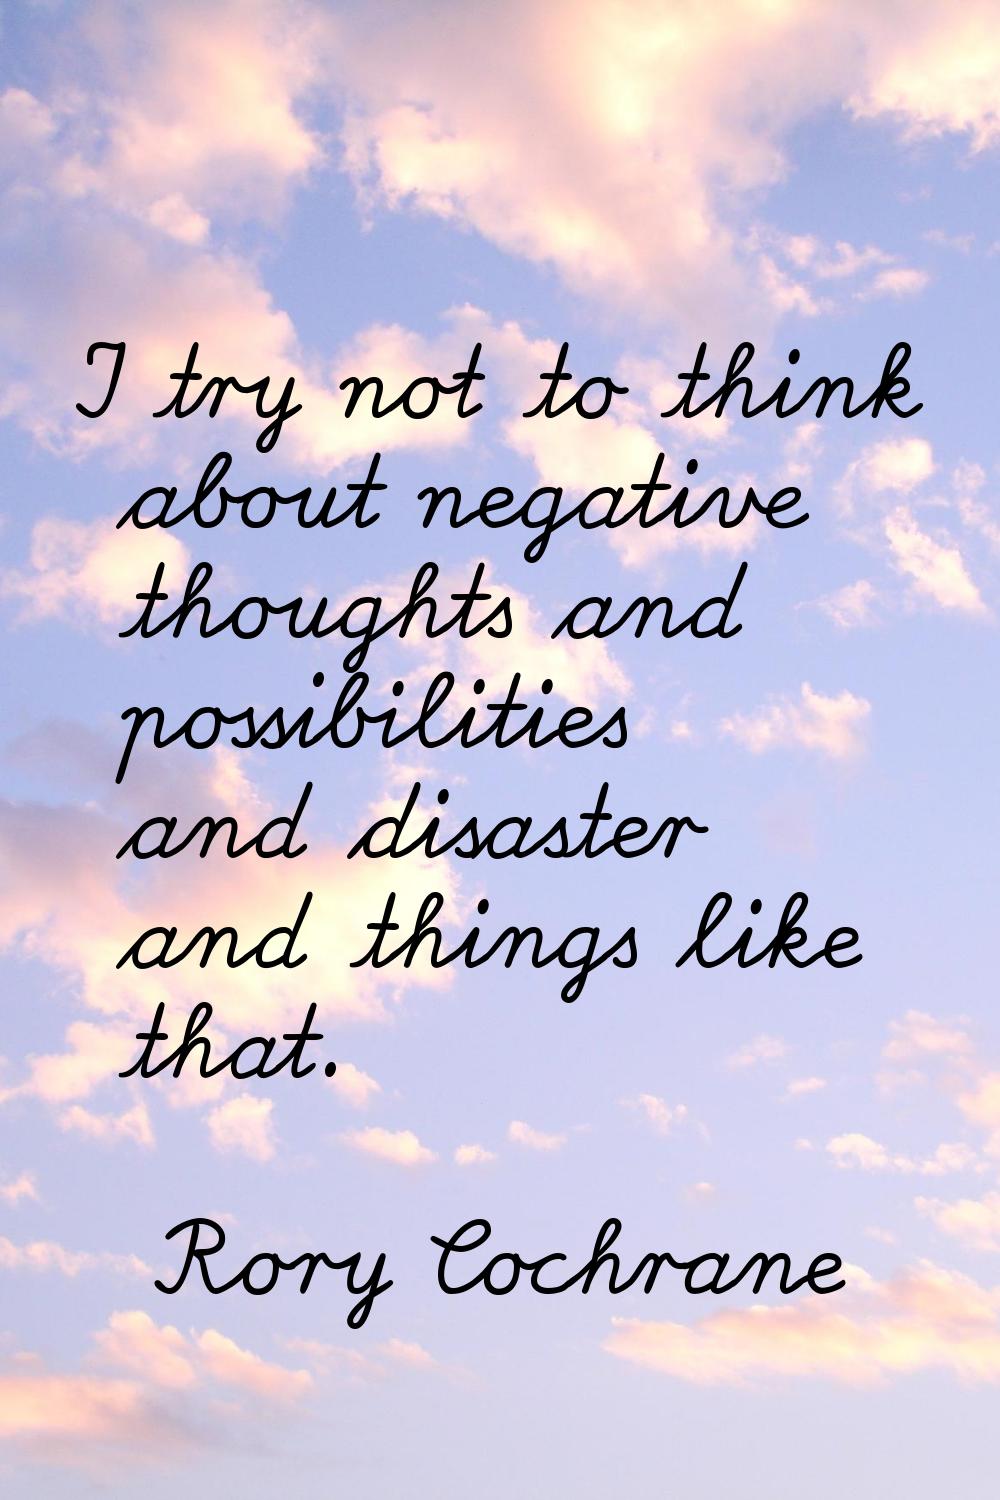 I try not to think about negative thoughts and possibilities and disaster and things like that.